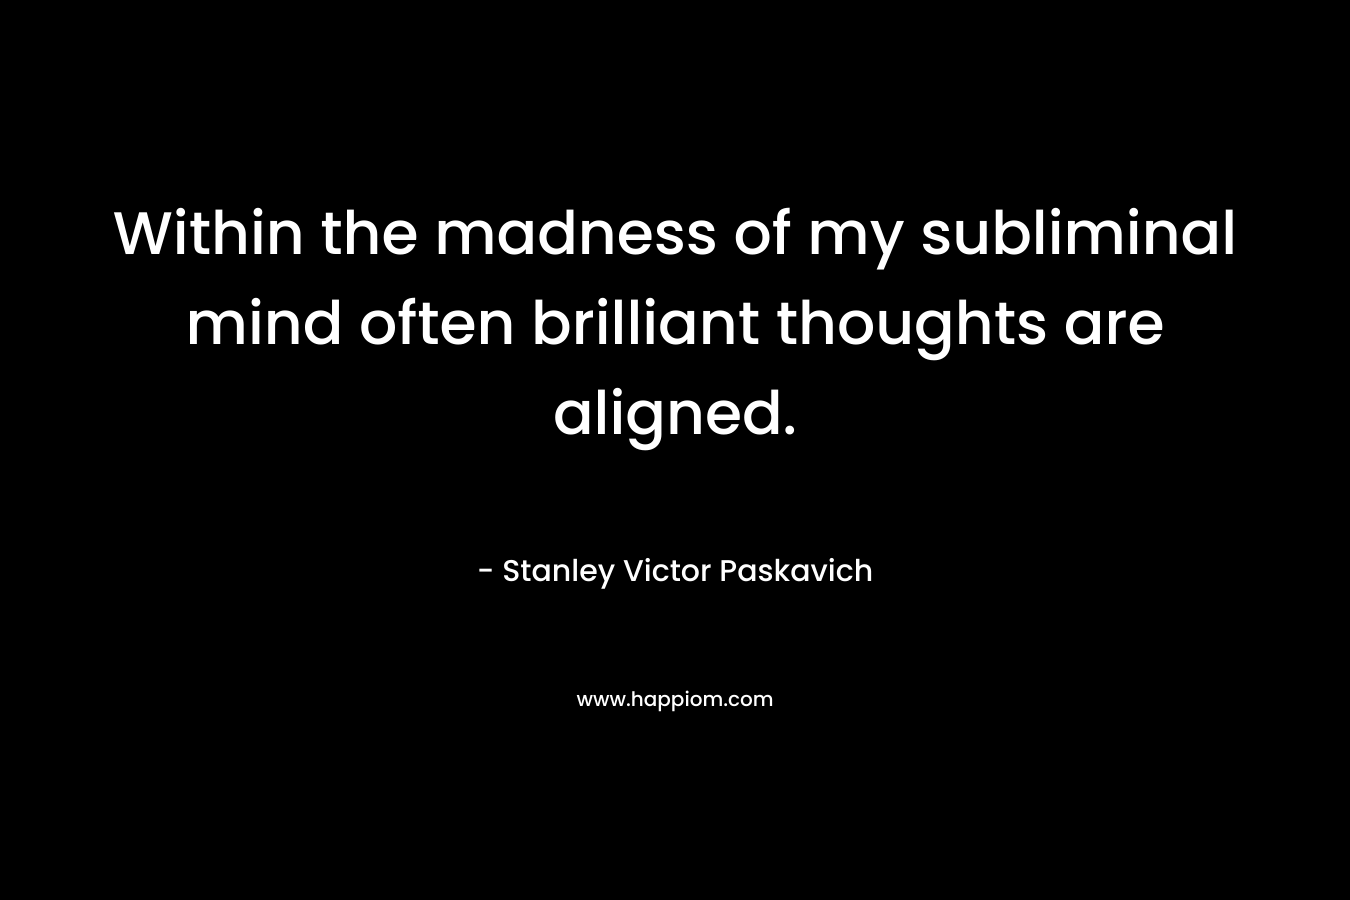 Within the madness of my subliminal mind often brilliant thoughts are aligned.